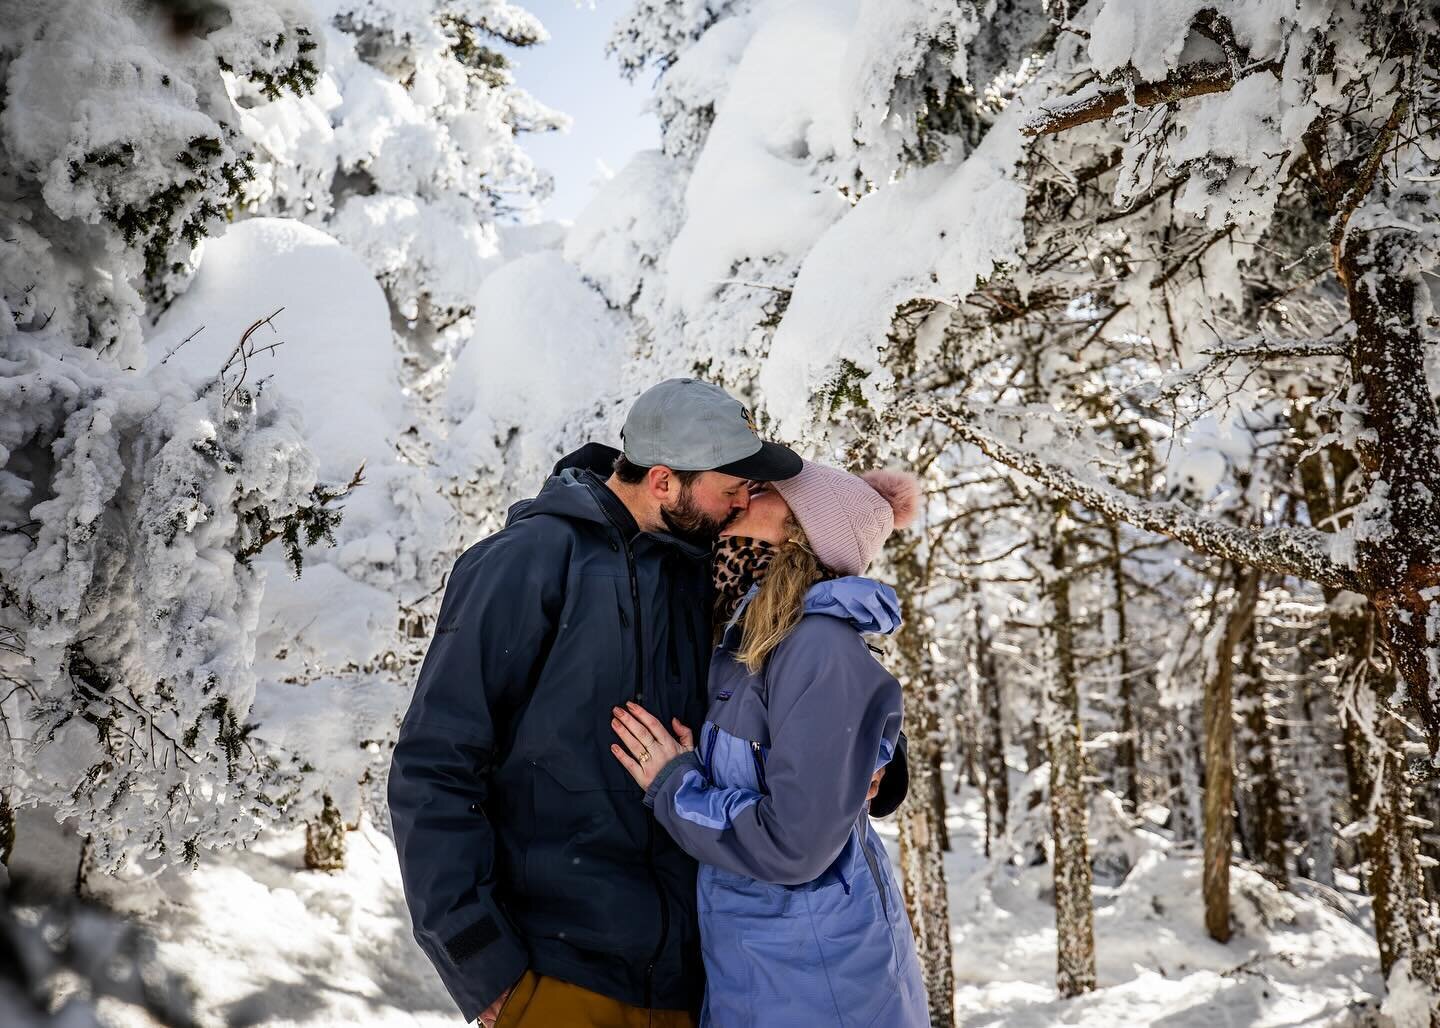 Sunday&rsquo;s bluebird skies were the perfect backdrop for Ben &amp; Rory&rsquo;s proposal @sugarbush_vt 🎿 Congratulations to the happy couple! #thisishappening

@photos_by_kintz 
@sugarbush_vt 
@madrivervalley 
@ben__gibson 
@rorybrown_44 

#photo